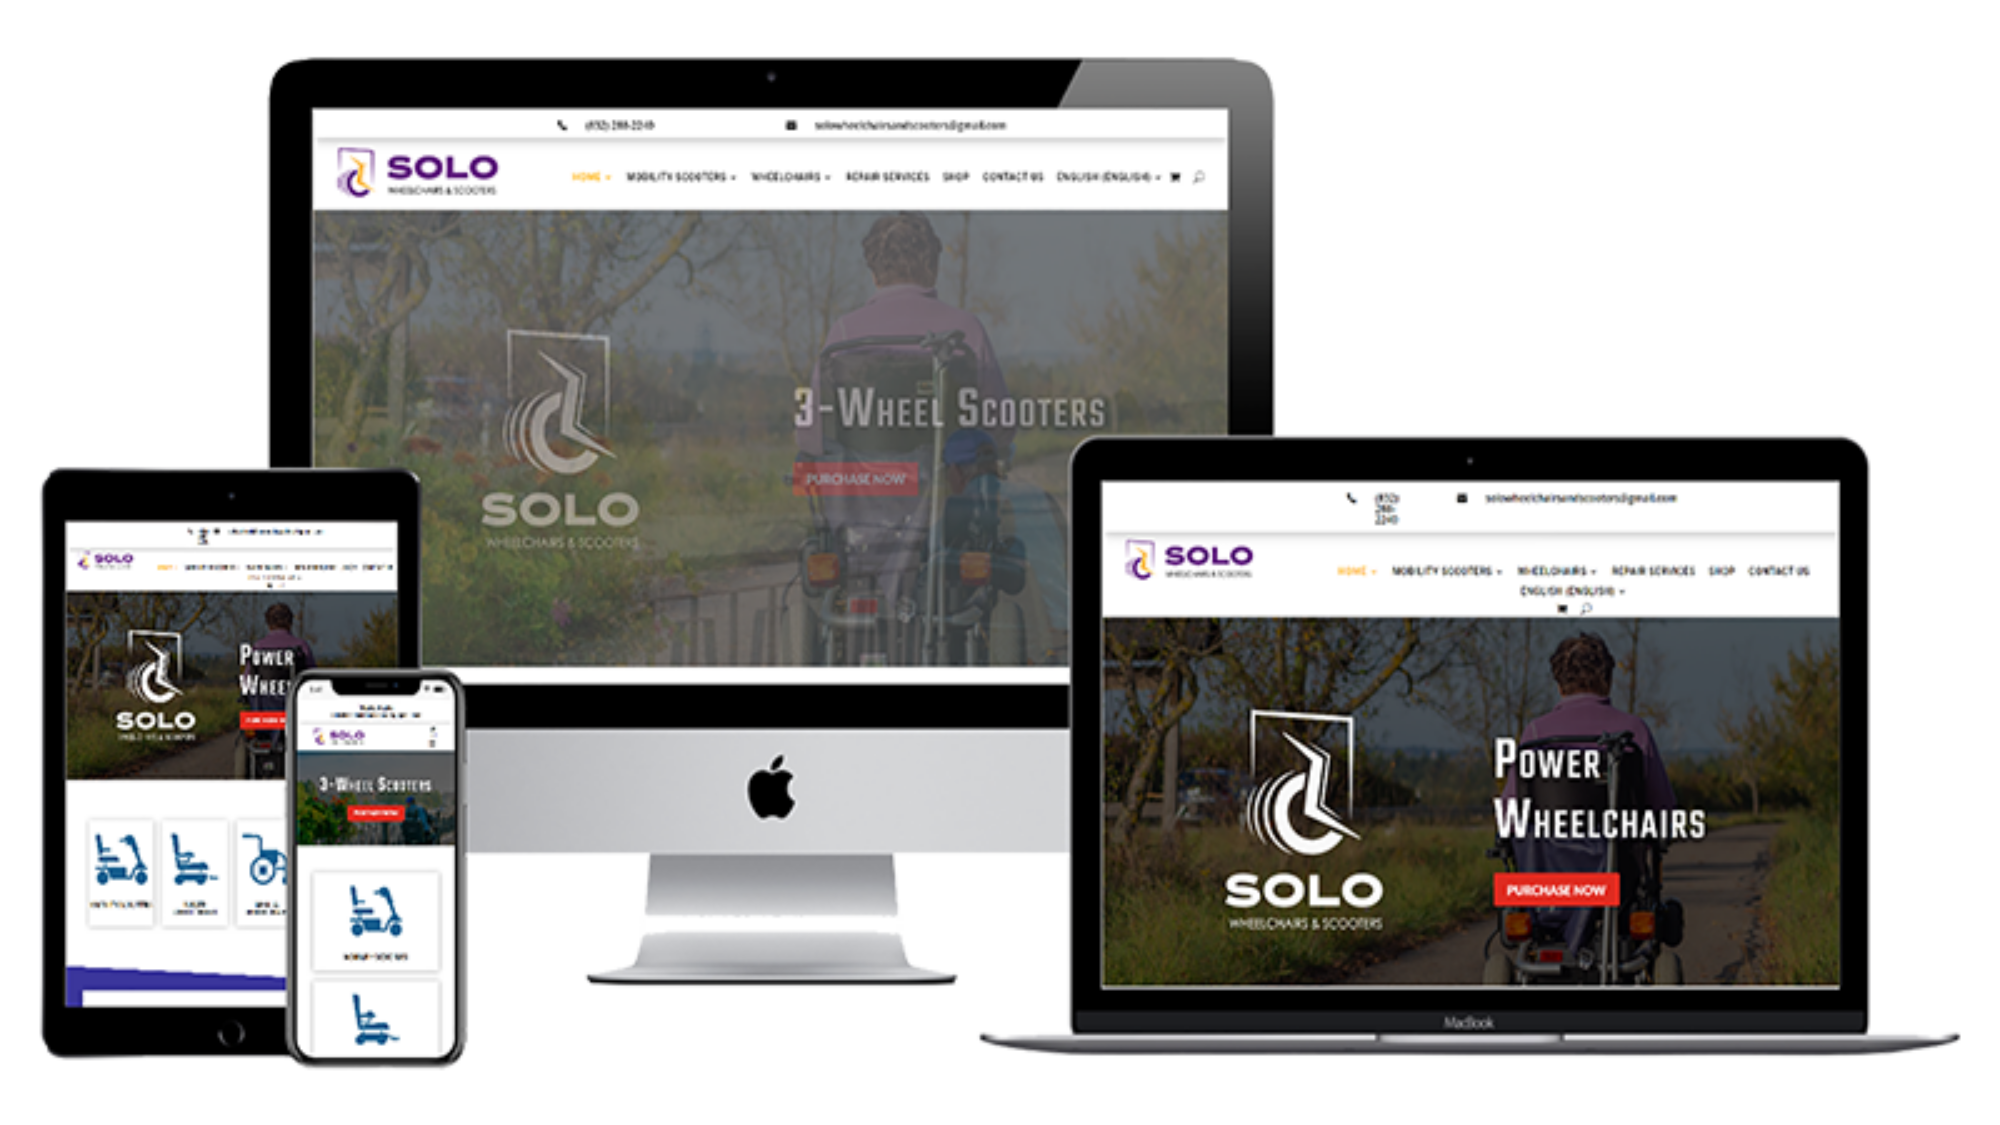 Solo Wheelchairs & Scooters Website Mockup